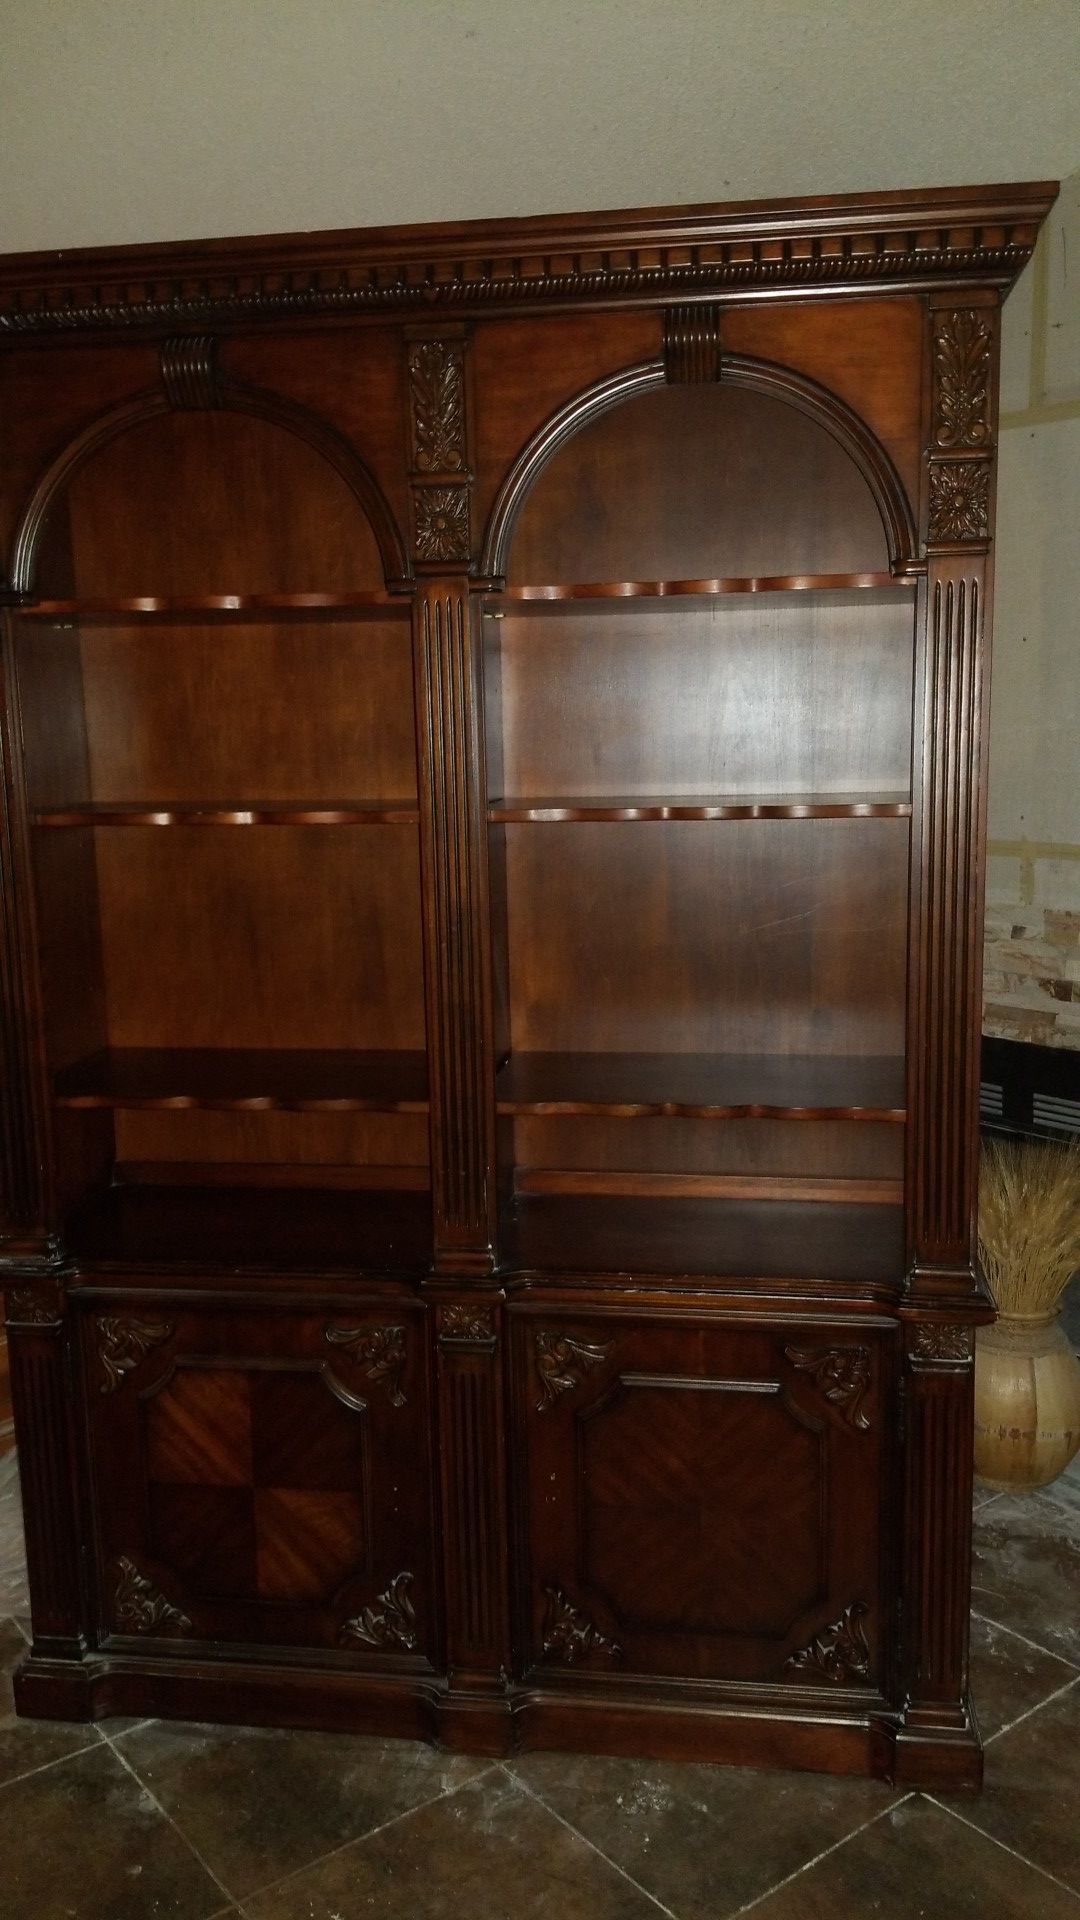 Book Case- 5 ft. wide by 16 in. deep by 7 ft 6 in. tall